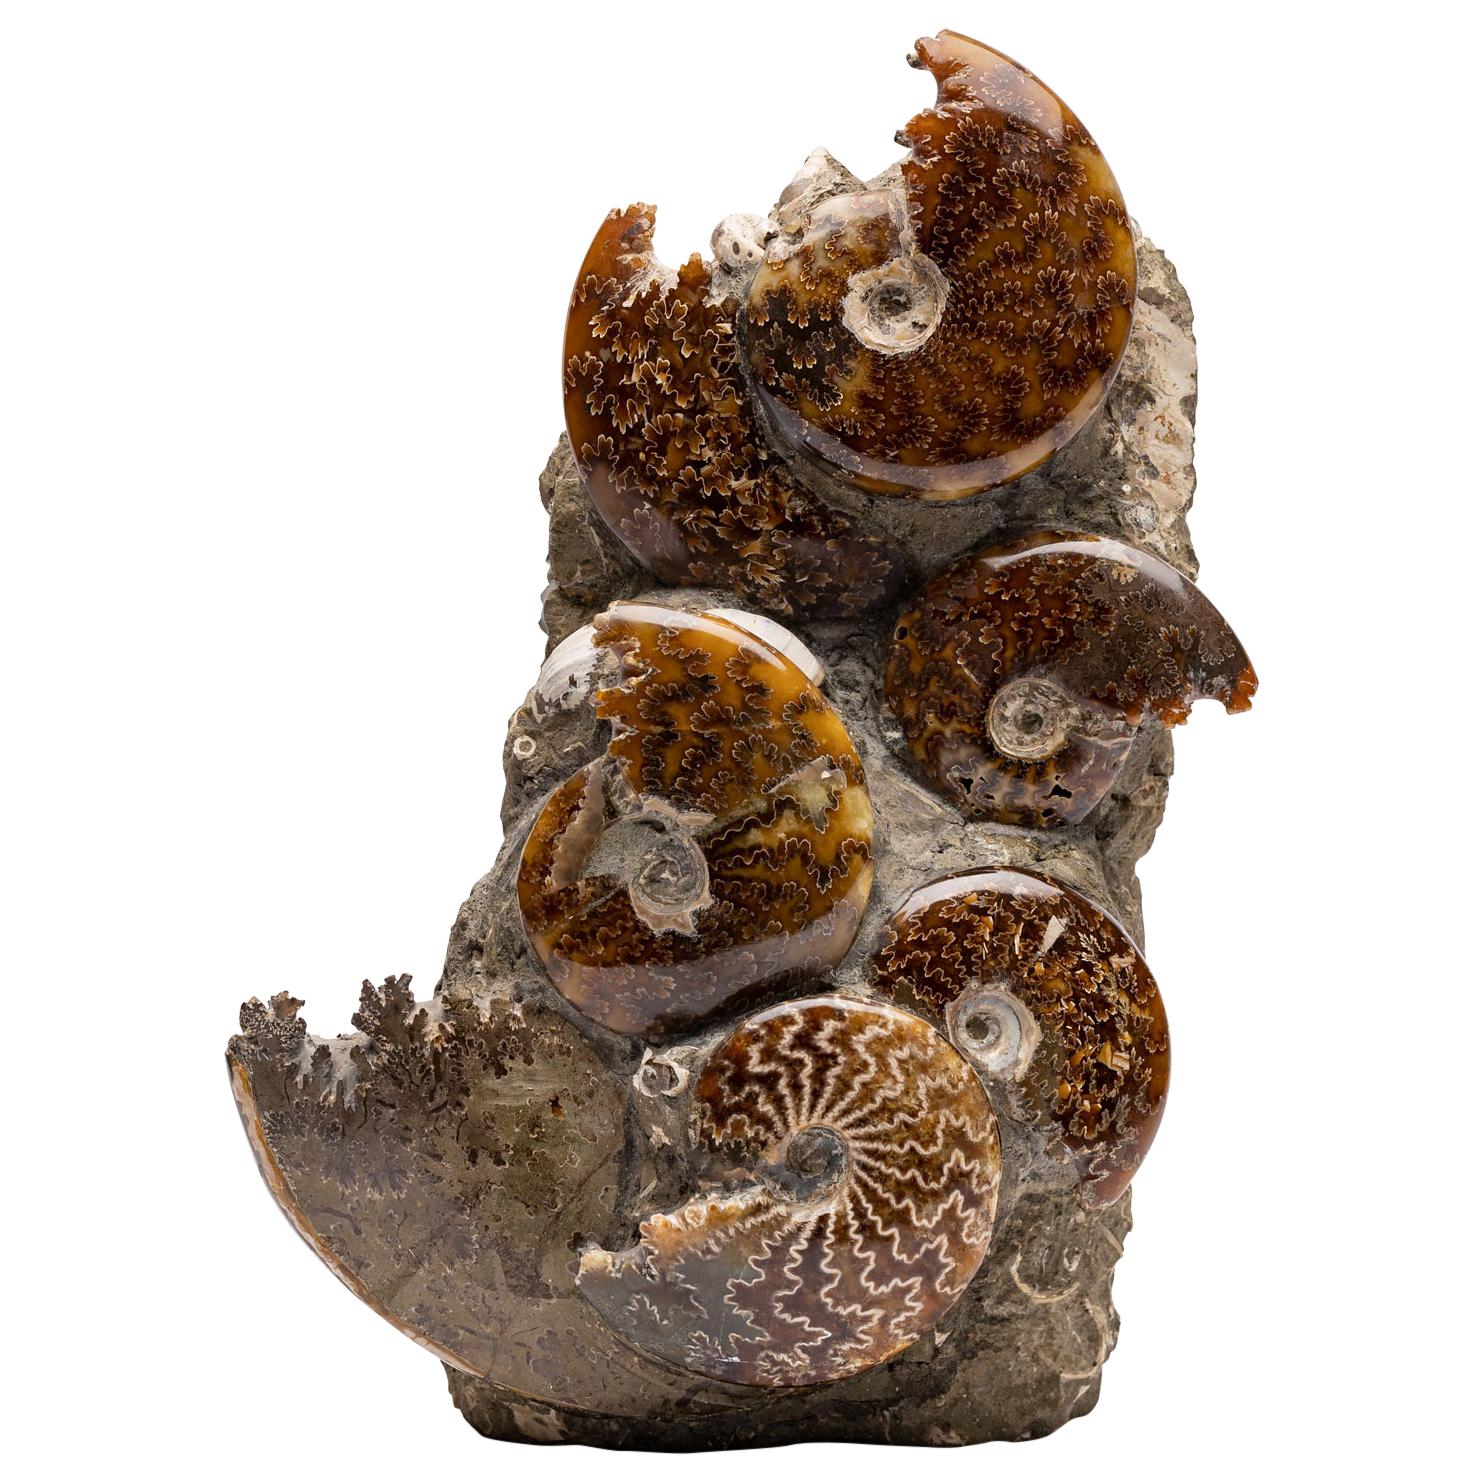 Free Standing Fossil Ammonite Cluster from Madagascar, Cretaceous Period